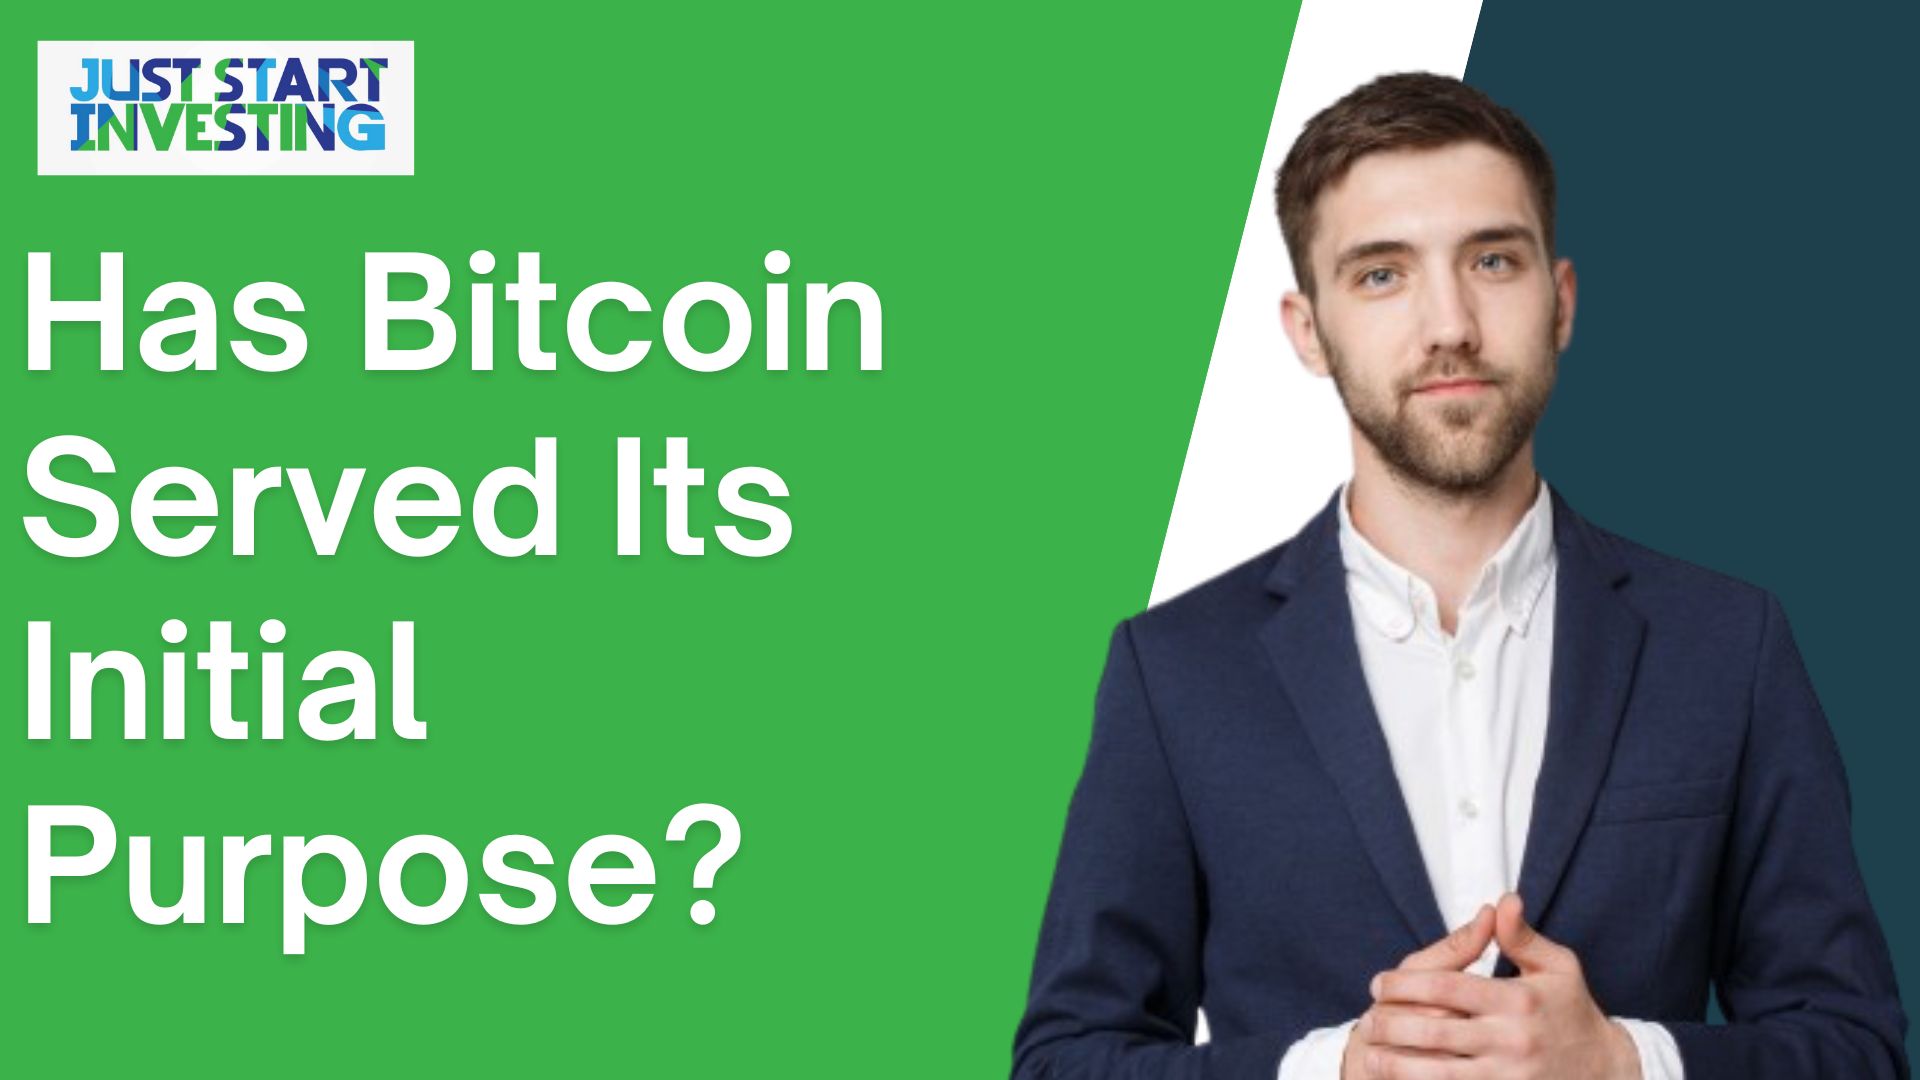 Has Bitcoin Served Its Initial Purpose